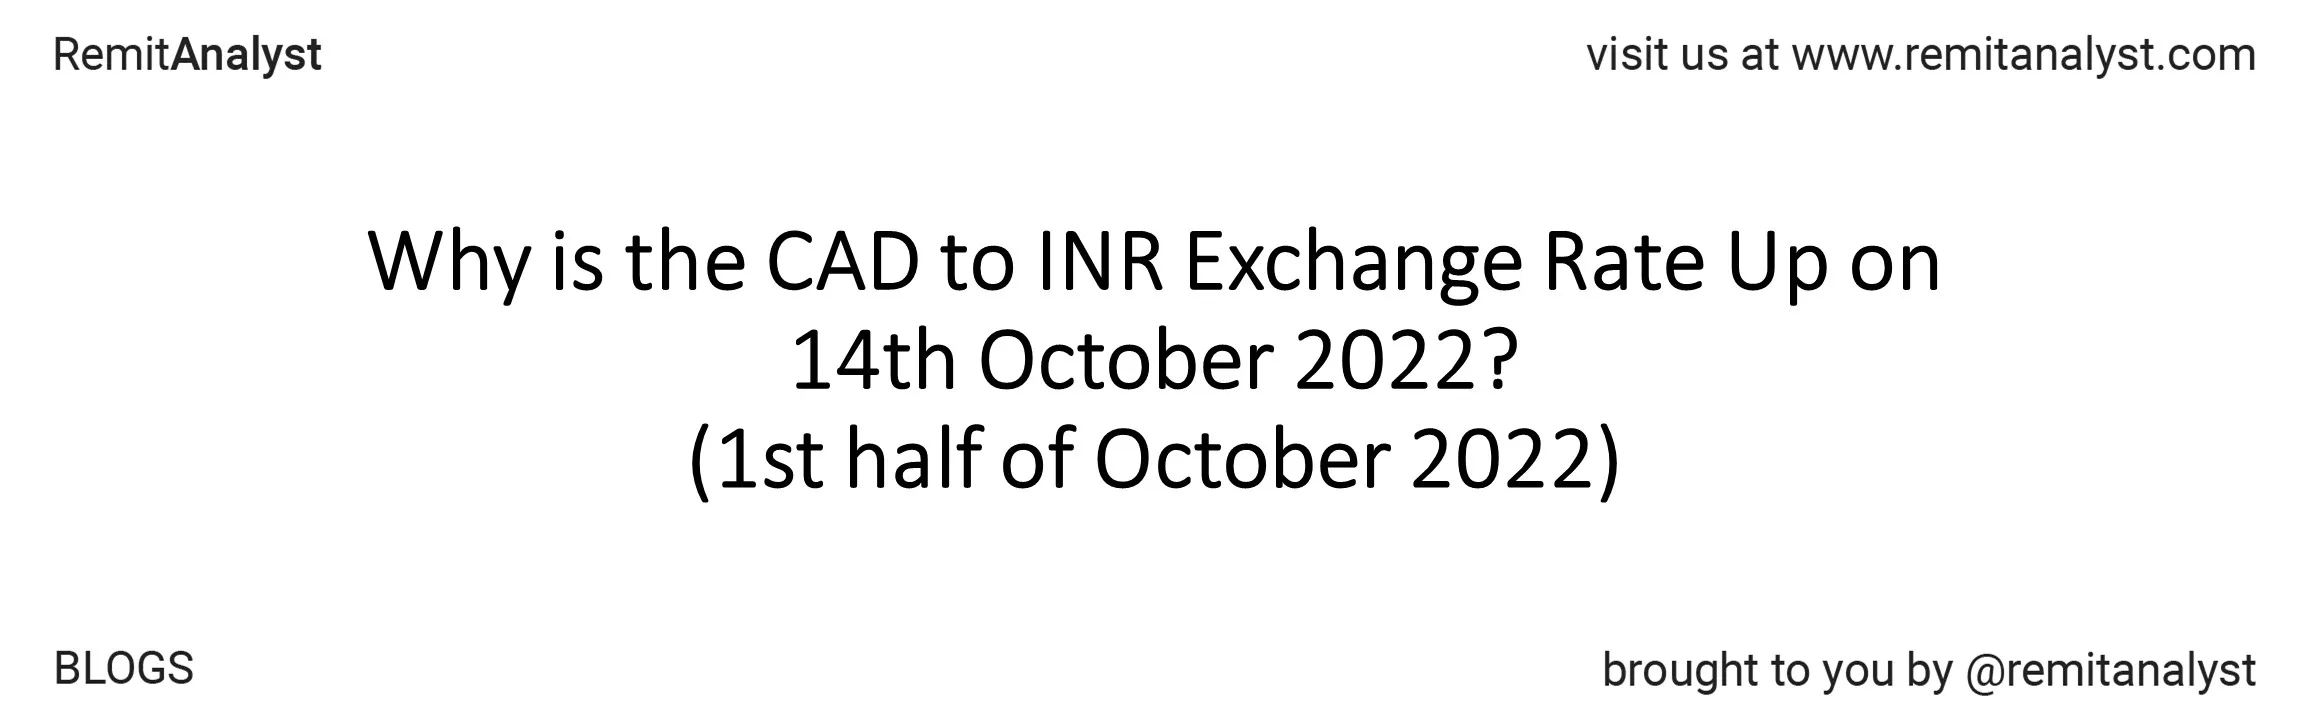 cad-to-inr-exchange-rate-from-3-oct-2022-to-14-oct-2022-title